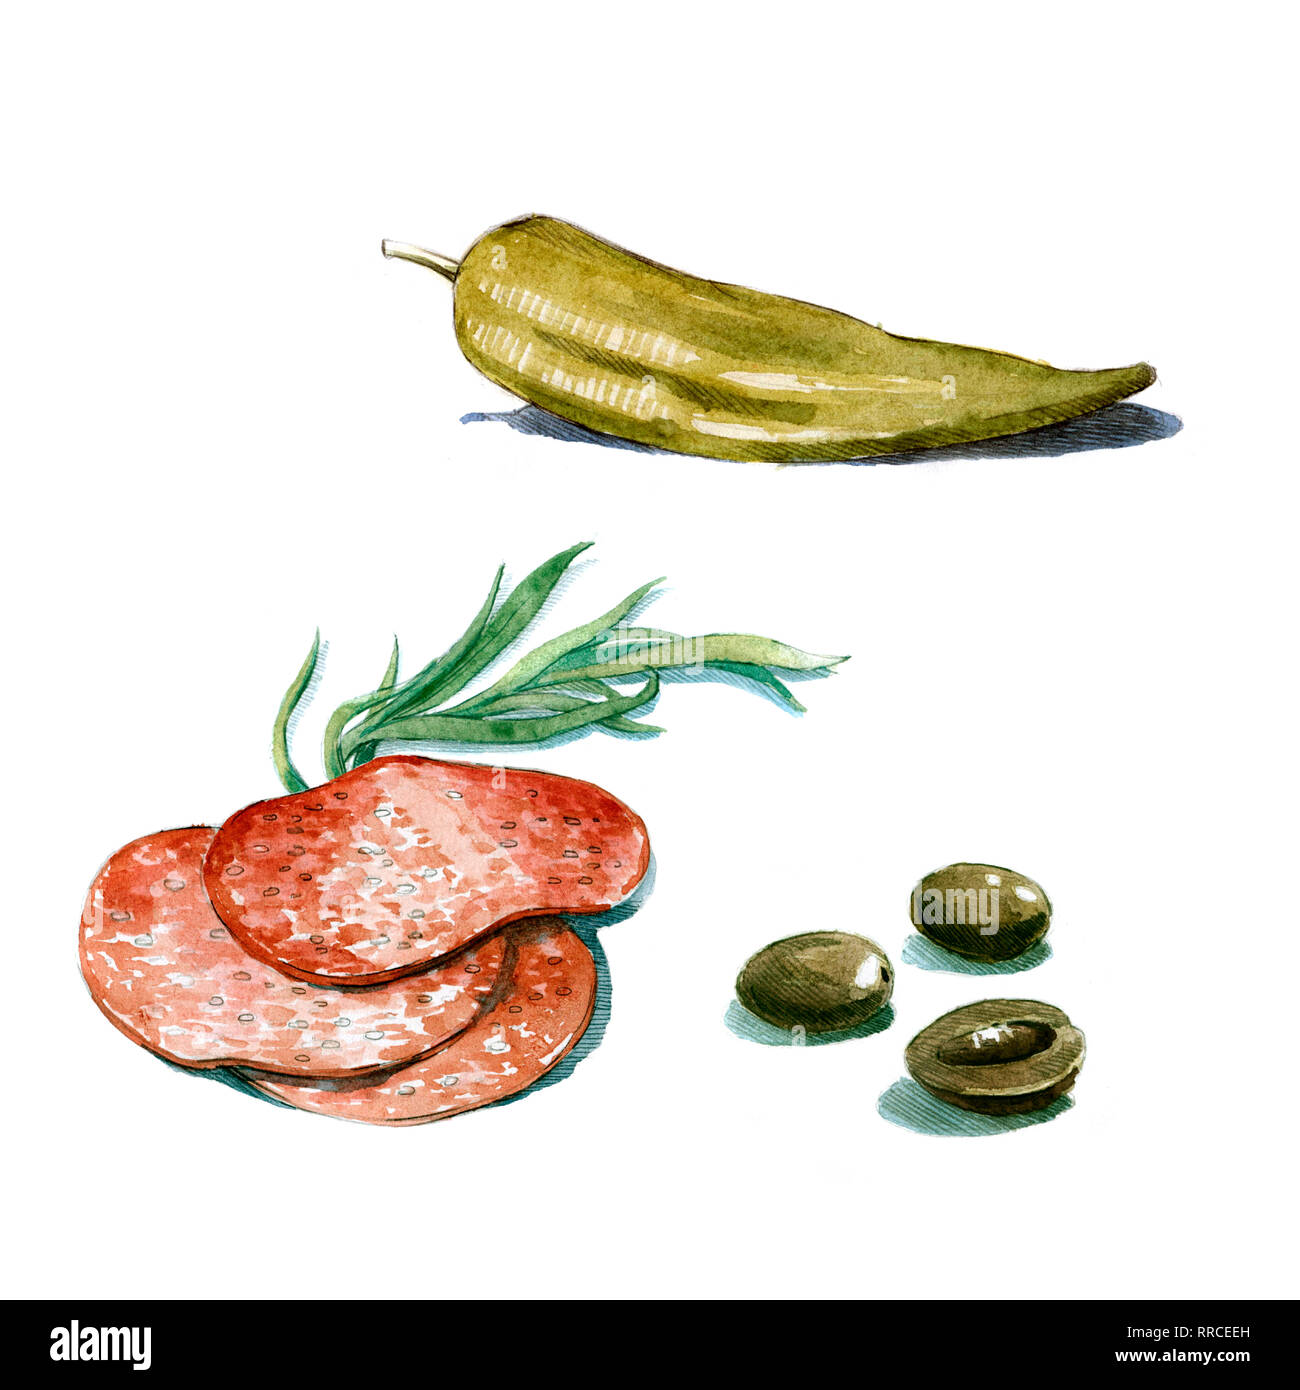 Salami slices tarragon olives and pepper watercolor illustration on white background Stock Photo